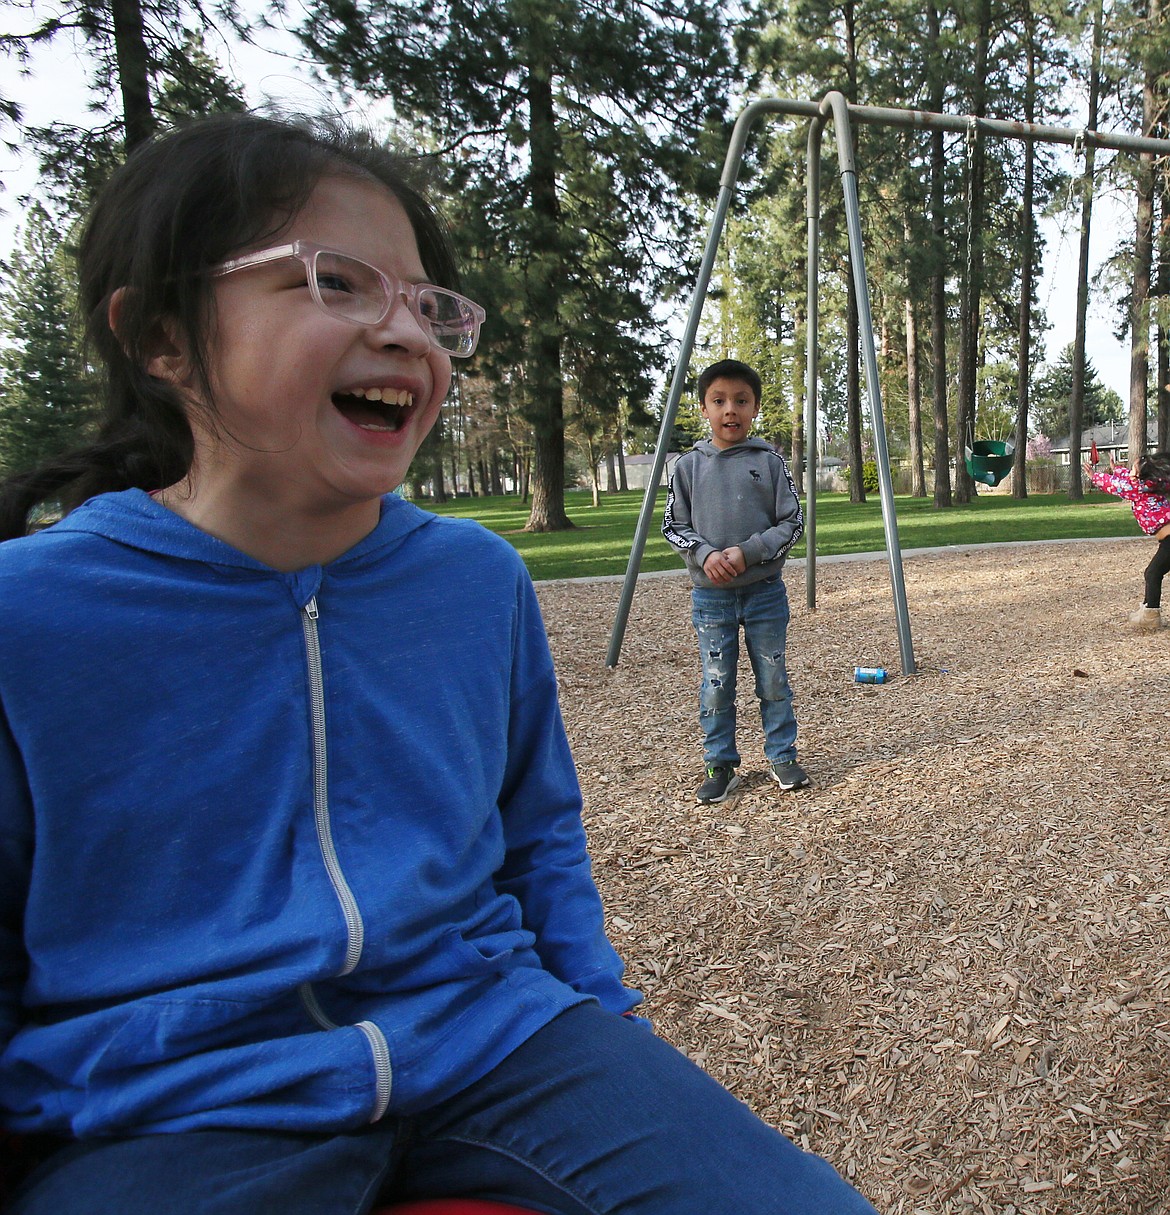 Dakota Walker, left, 10, laughs as she plays in a park in Post Falls on Tuesday. Her adoptive little siblings, Jeremiah, 7, and Aaliyah 3, are in the background.